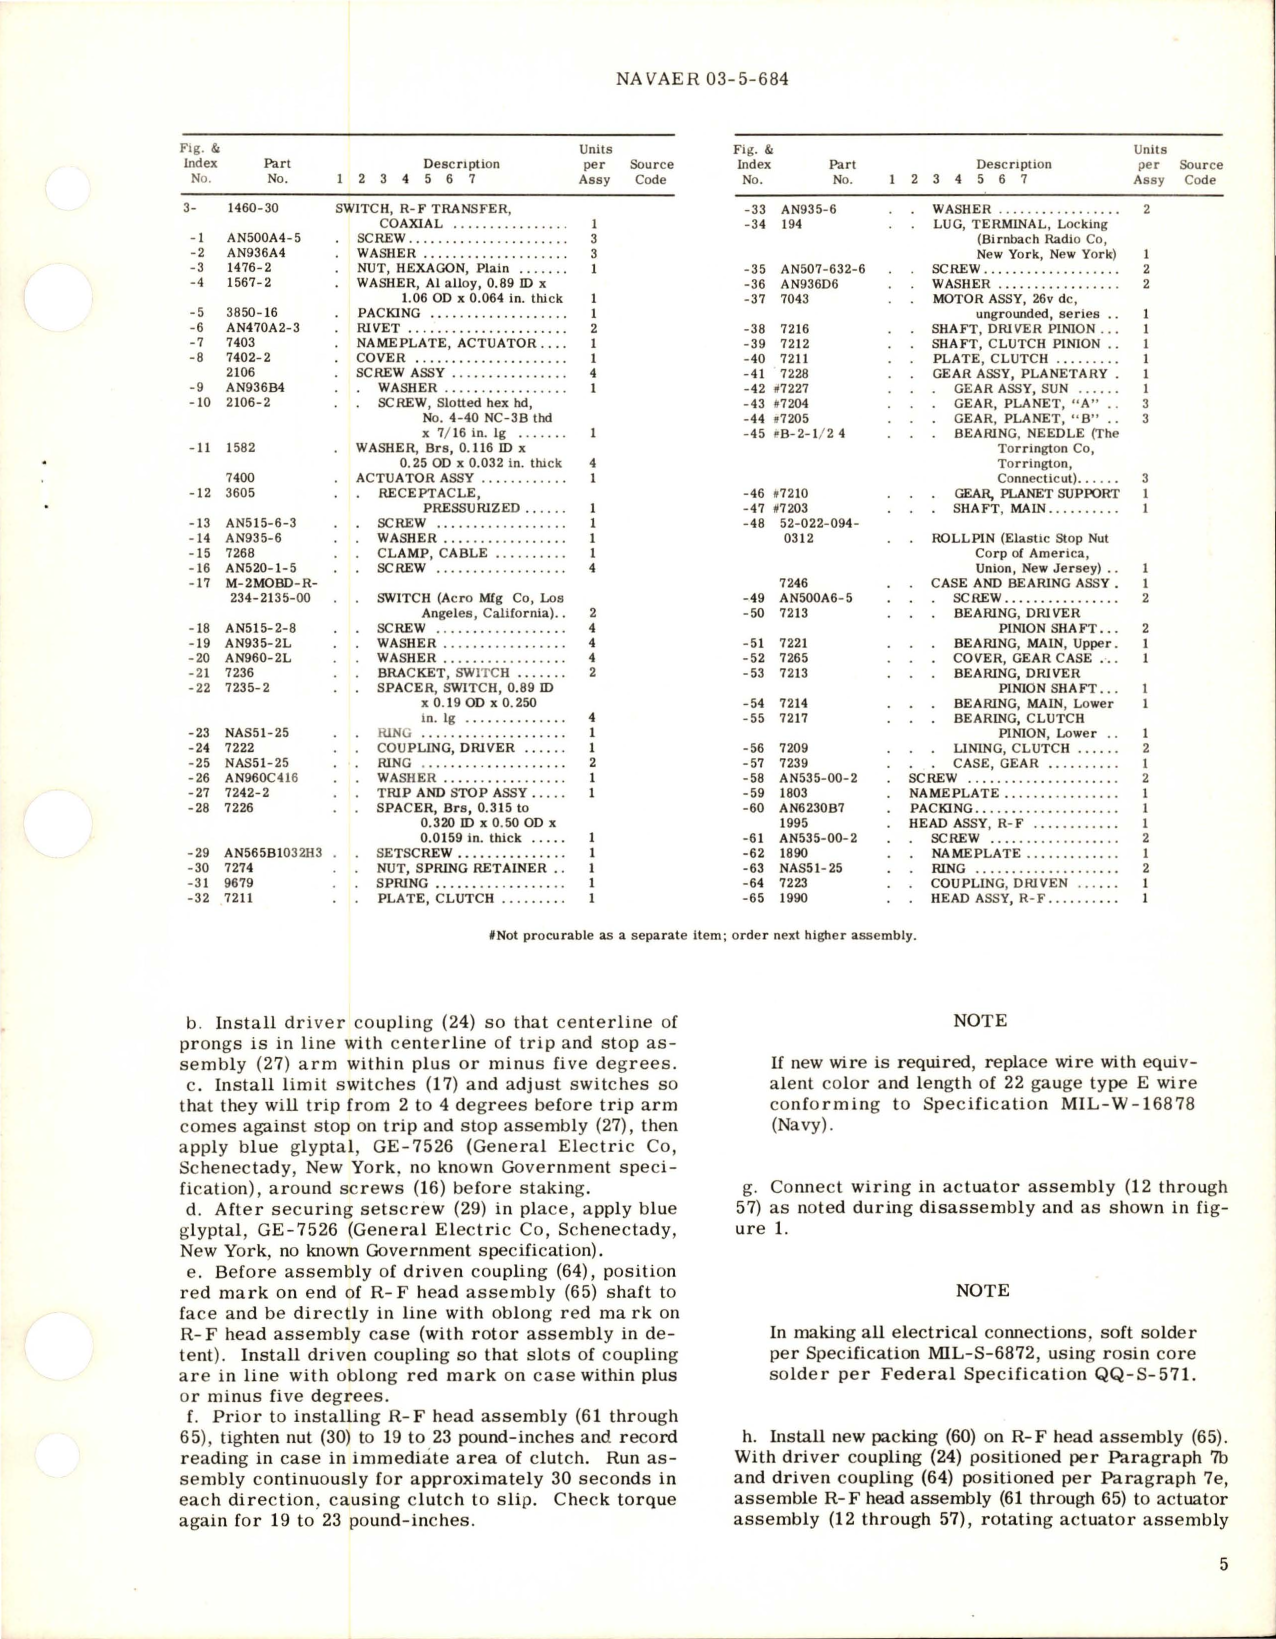 Sample page 5 from AirCorps Library document: Overhaul Instructions with Parts Breakdown for Coaxial R-F Transfer Switch - Part 1460-30 